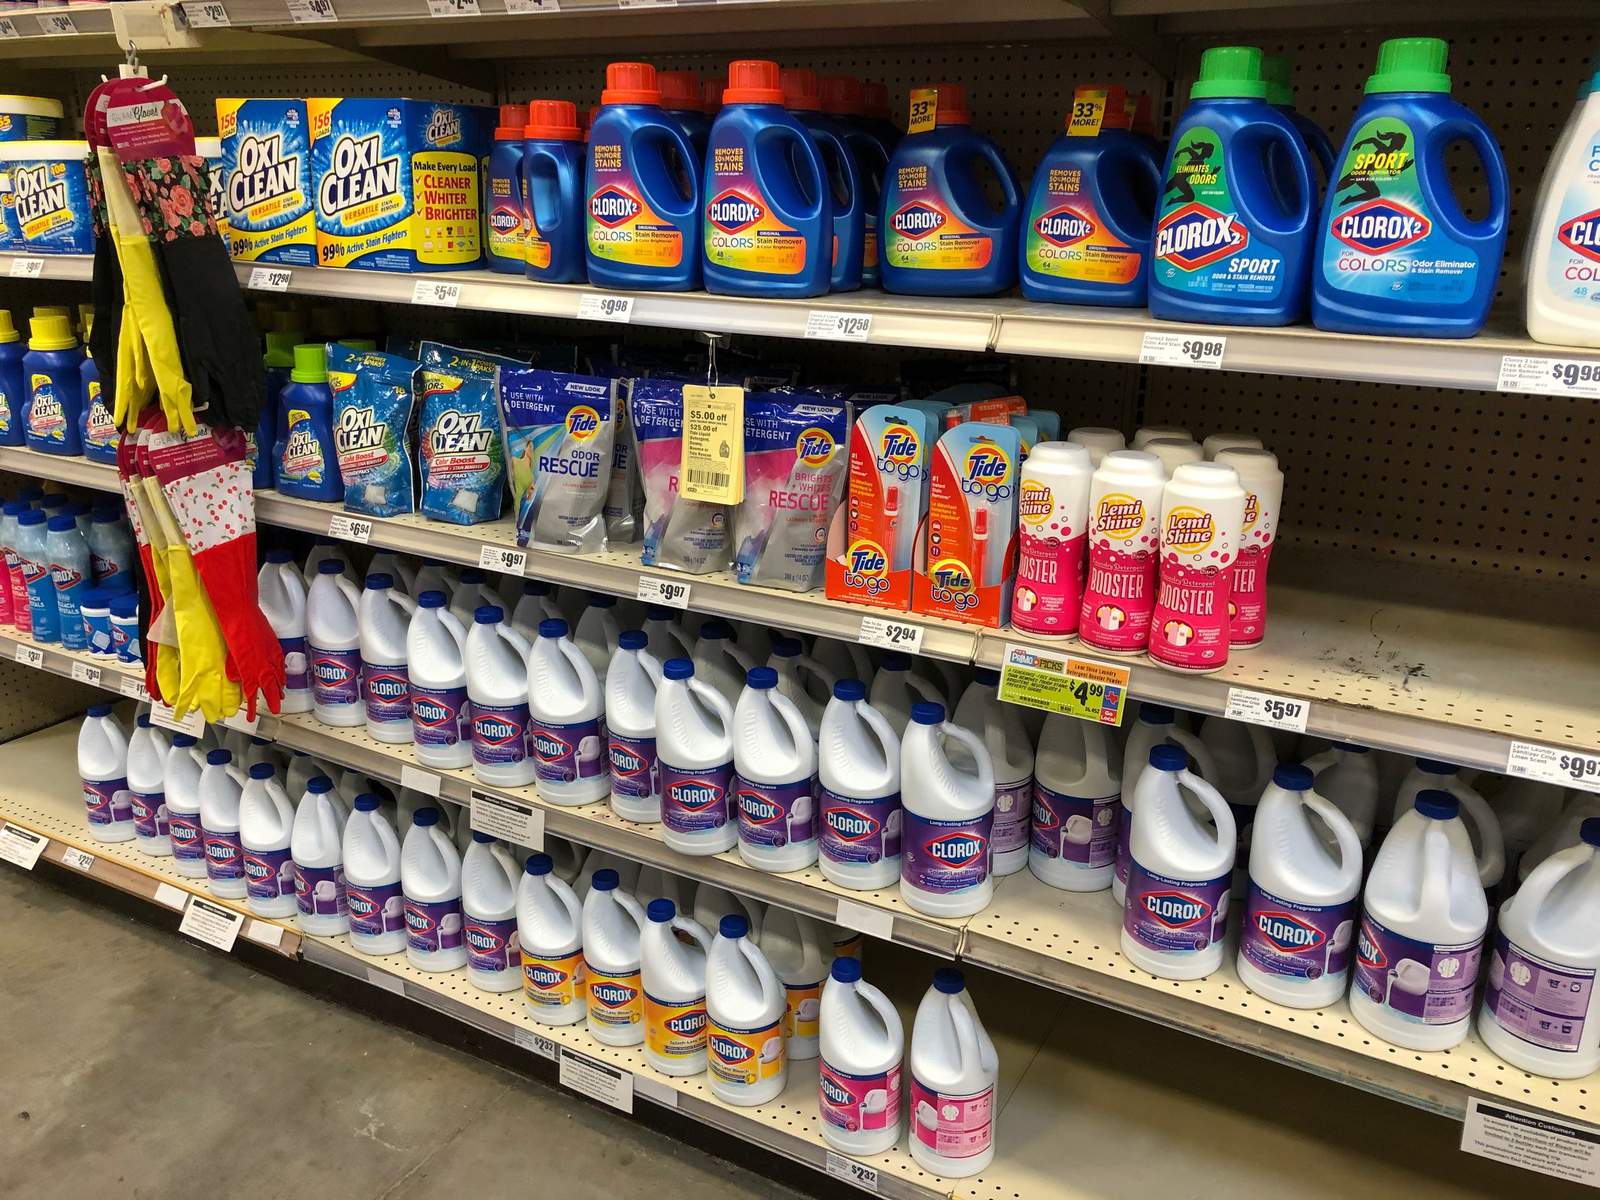 Did you know bleach expires and color-safe bleach doesnt disinfect?